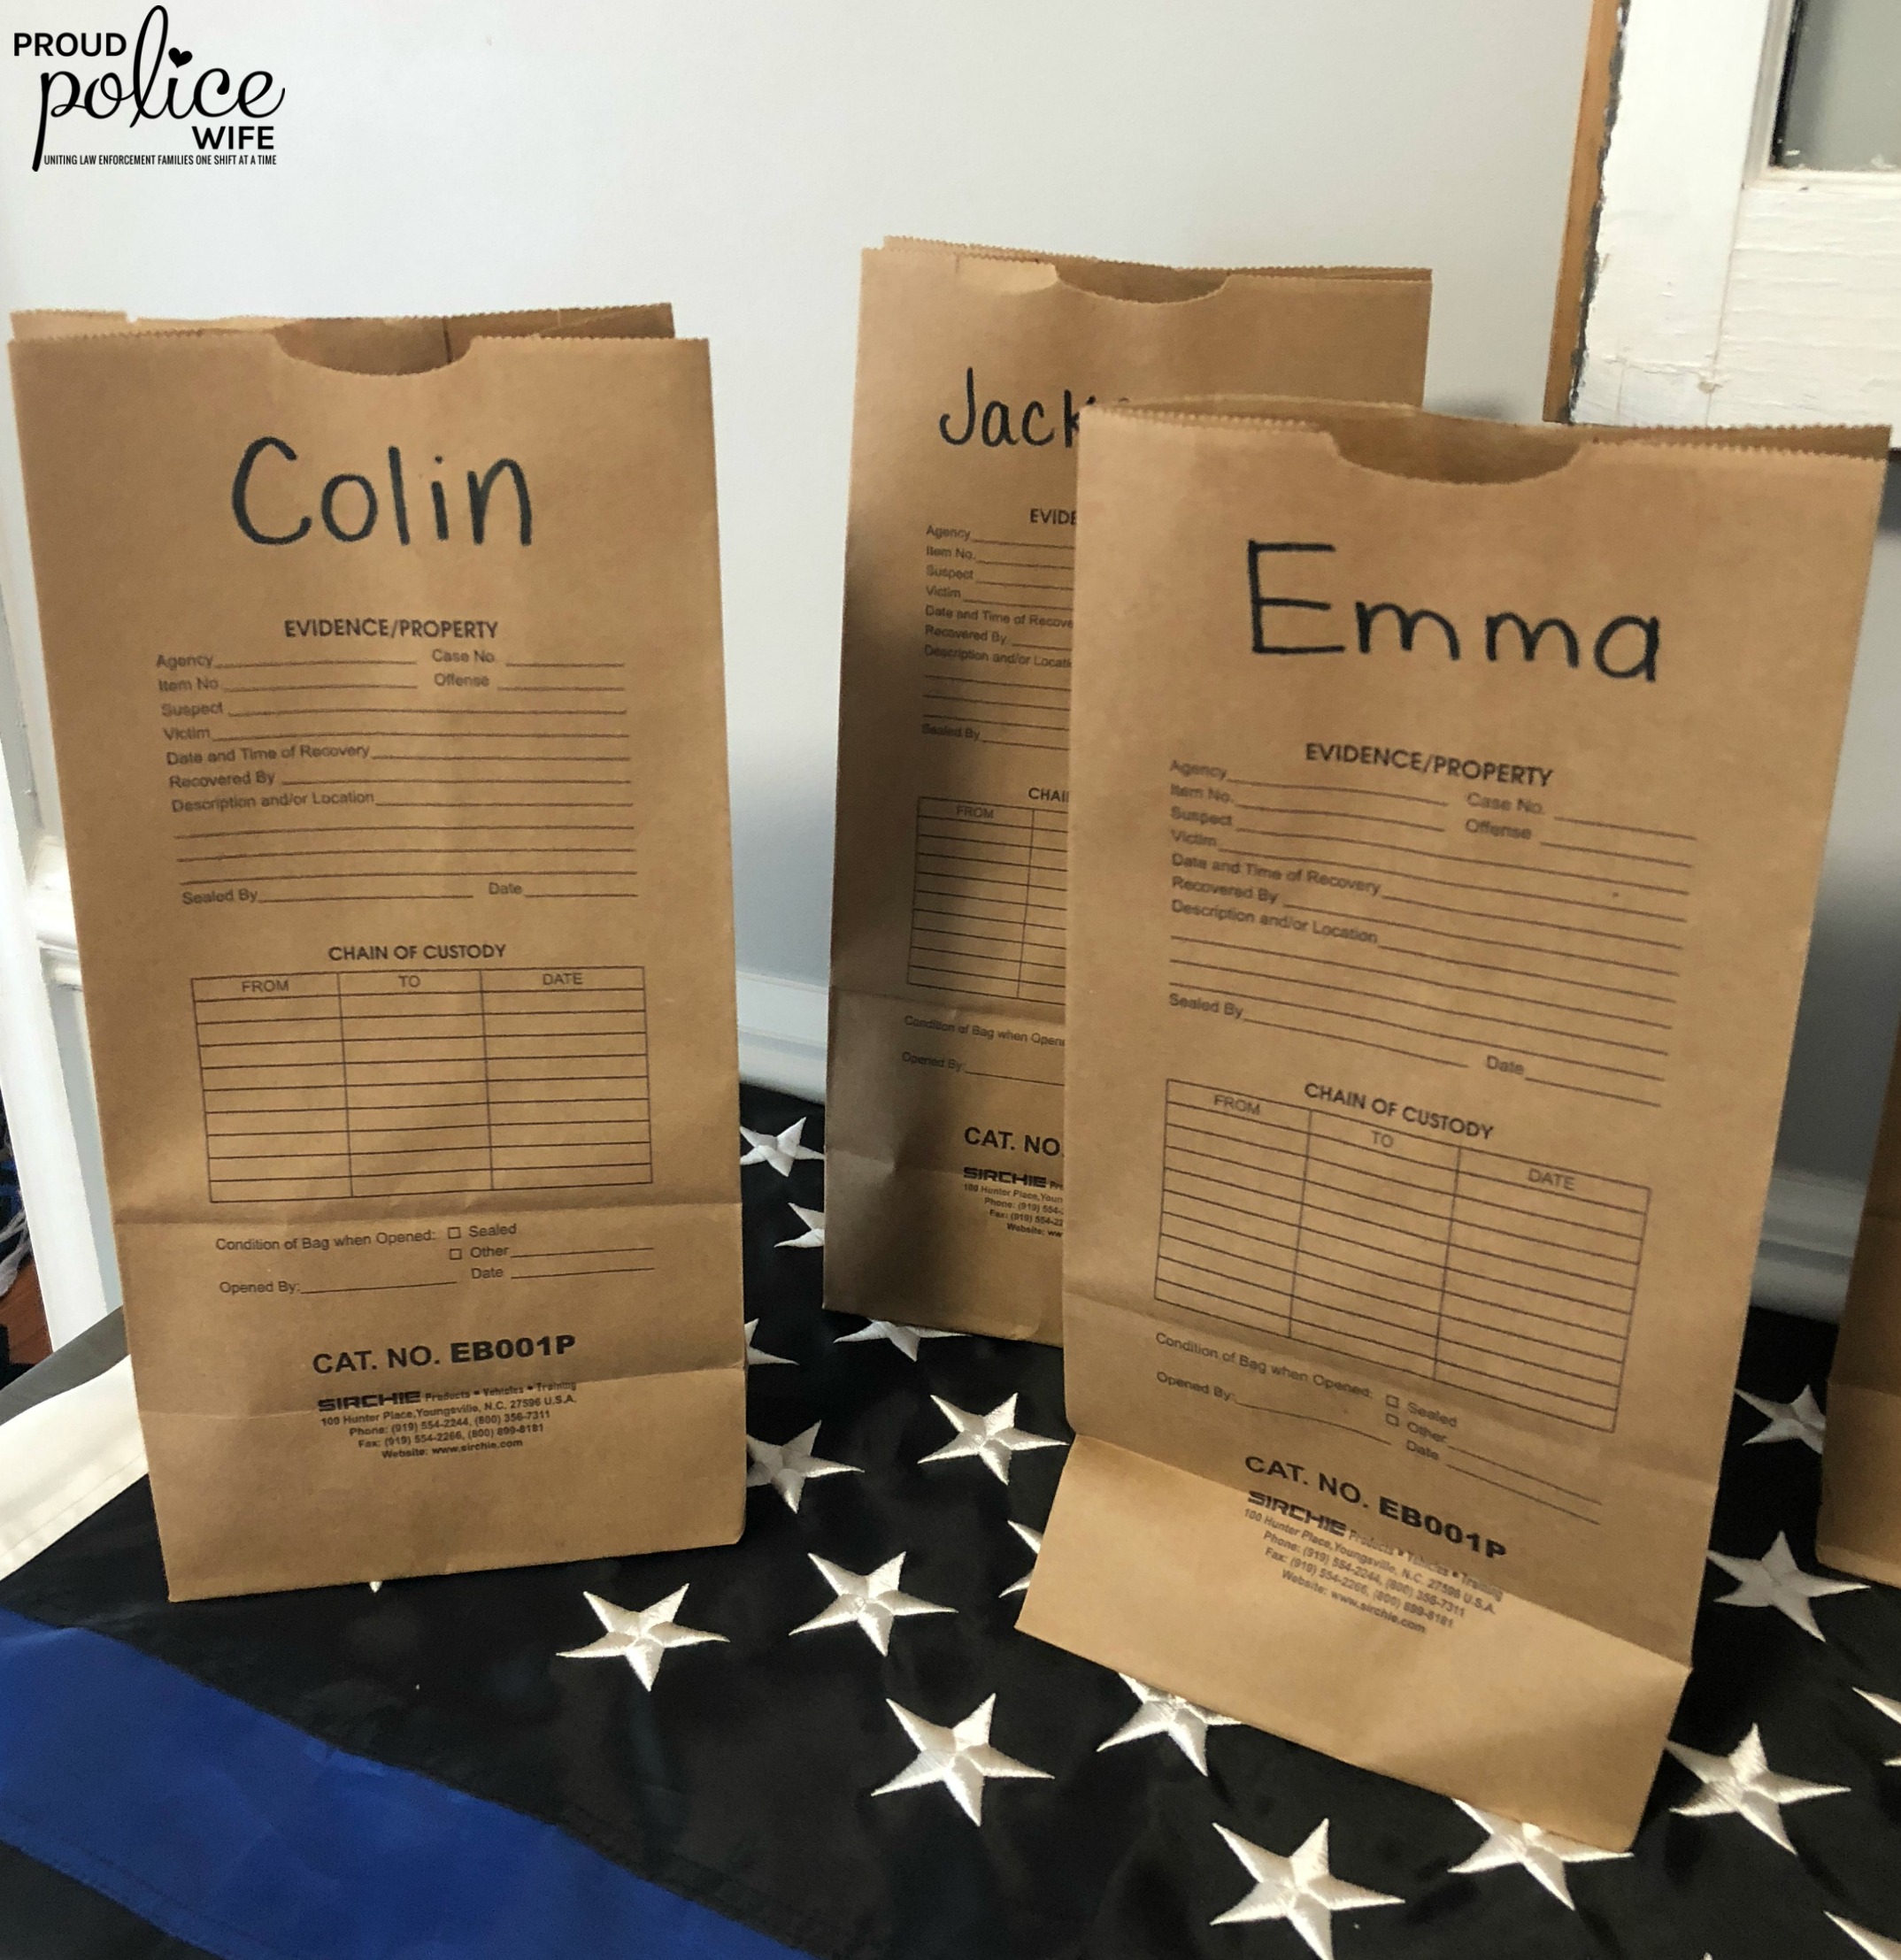 How to throw an easy + DIY police themed party (with FREE party printables)